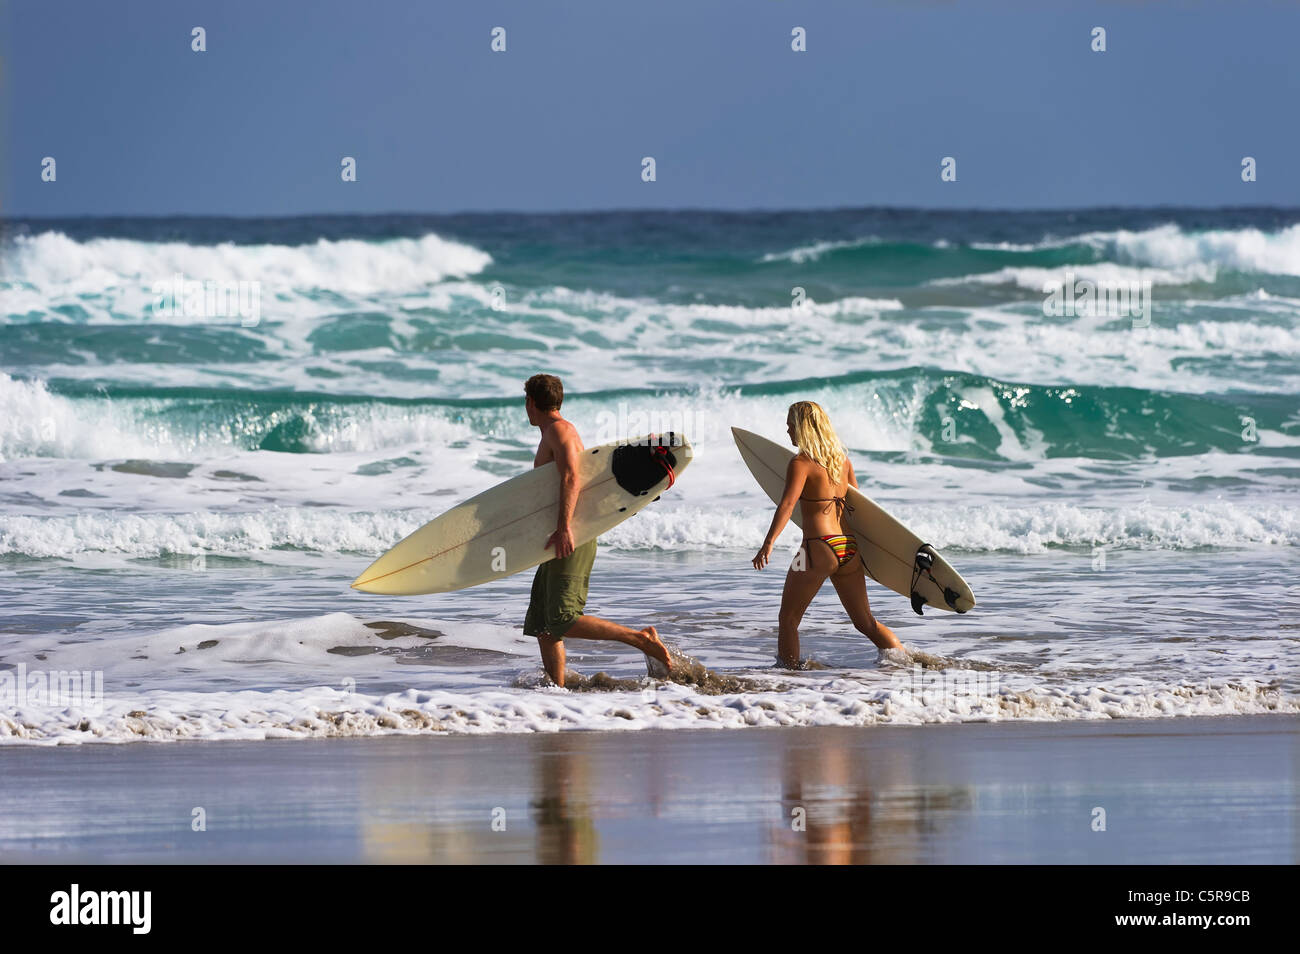 Two surfers heading out to the ocean waves. Stock Photo